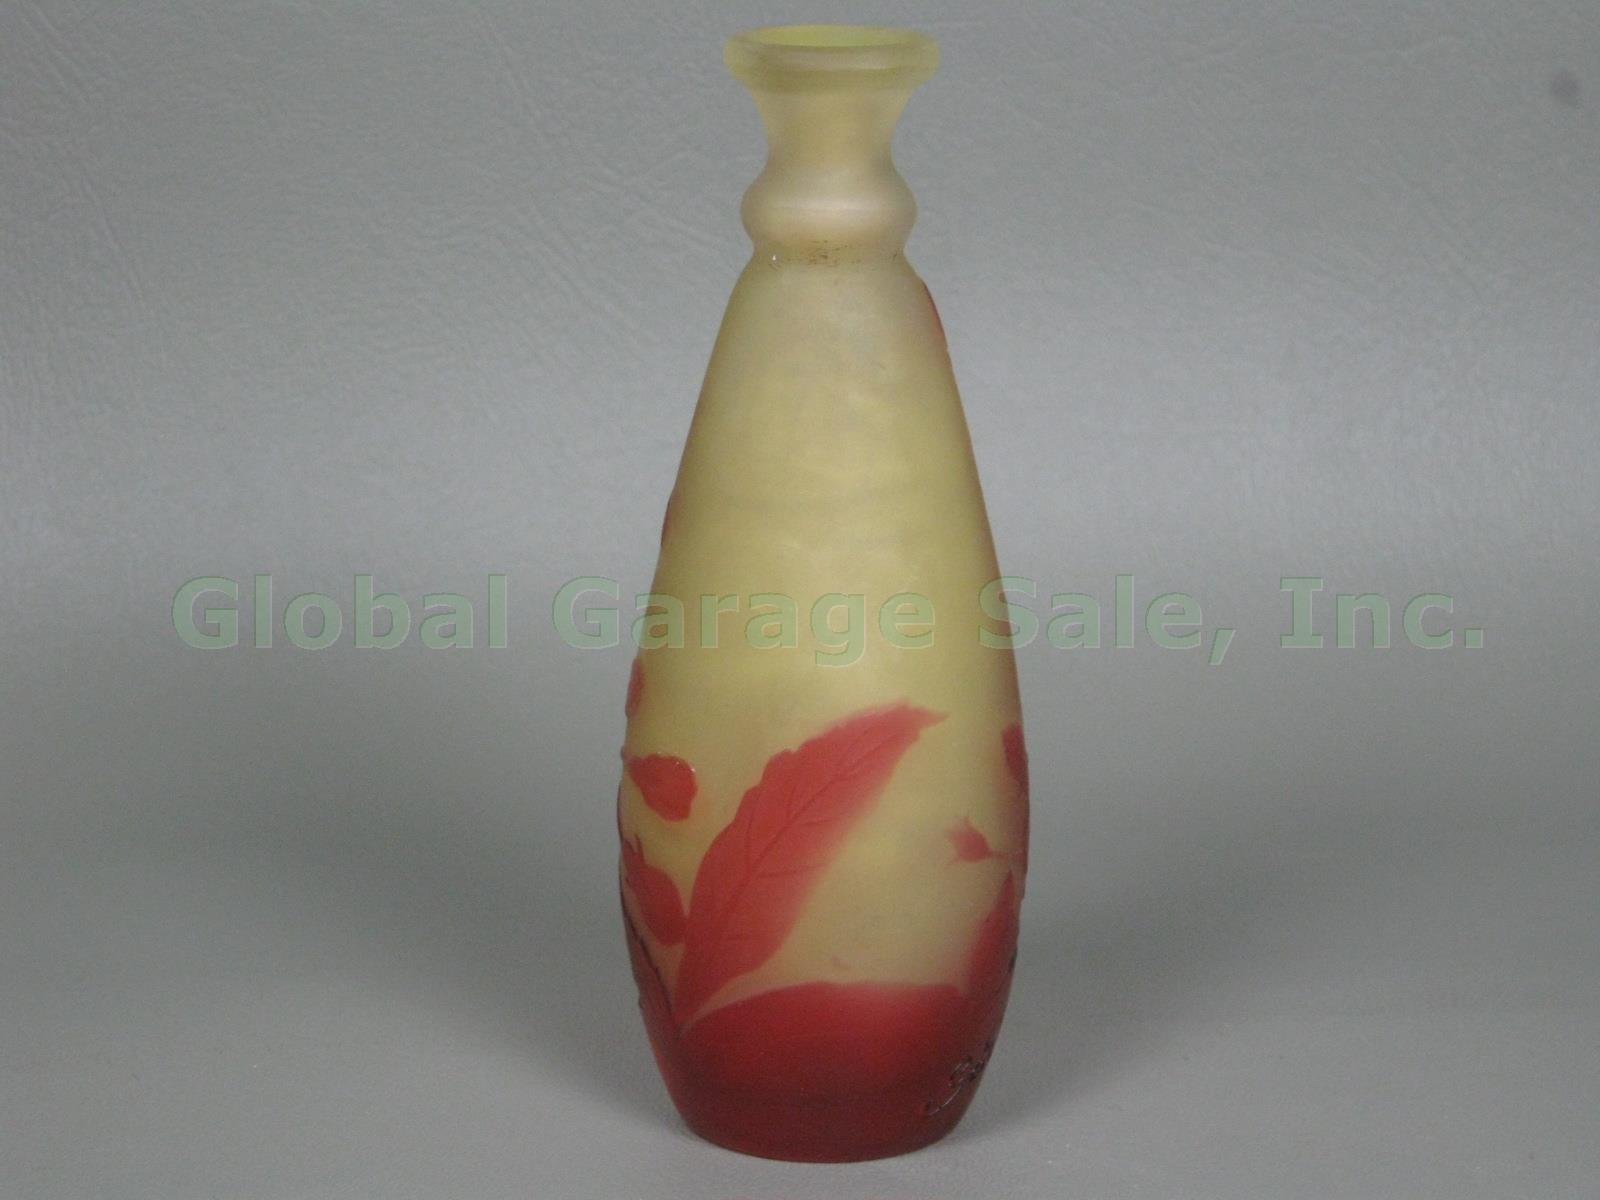 Antique Emile Galle Signed Cameo Art Glass Perfume Bottle Bud Vase Red & Yellow 4